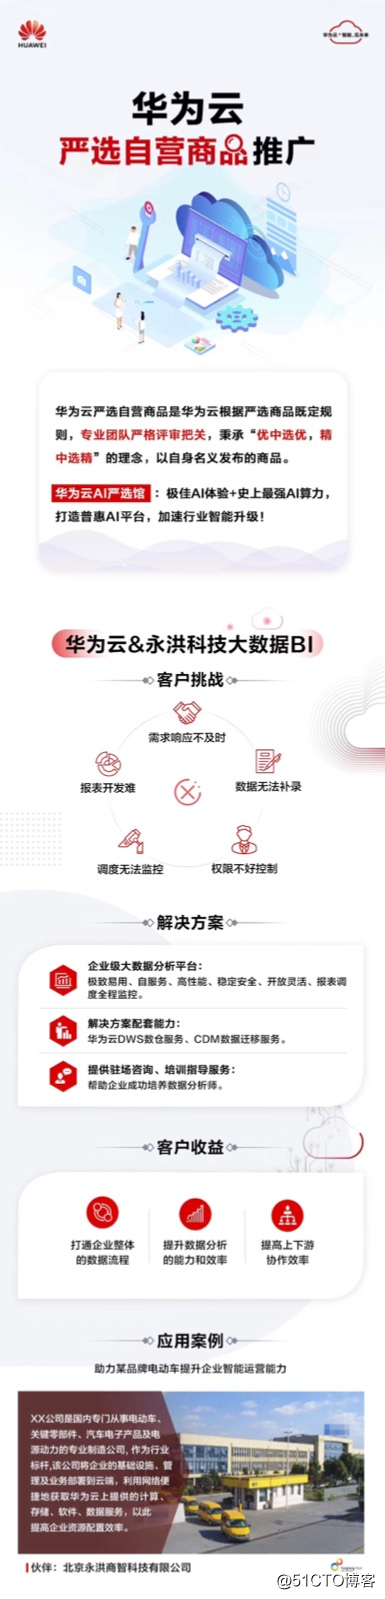 Huawei Technologies launched several joint Wing Hung warehouse + BI solutions that help government and enterprise cloud data on value analysis Picks